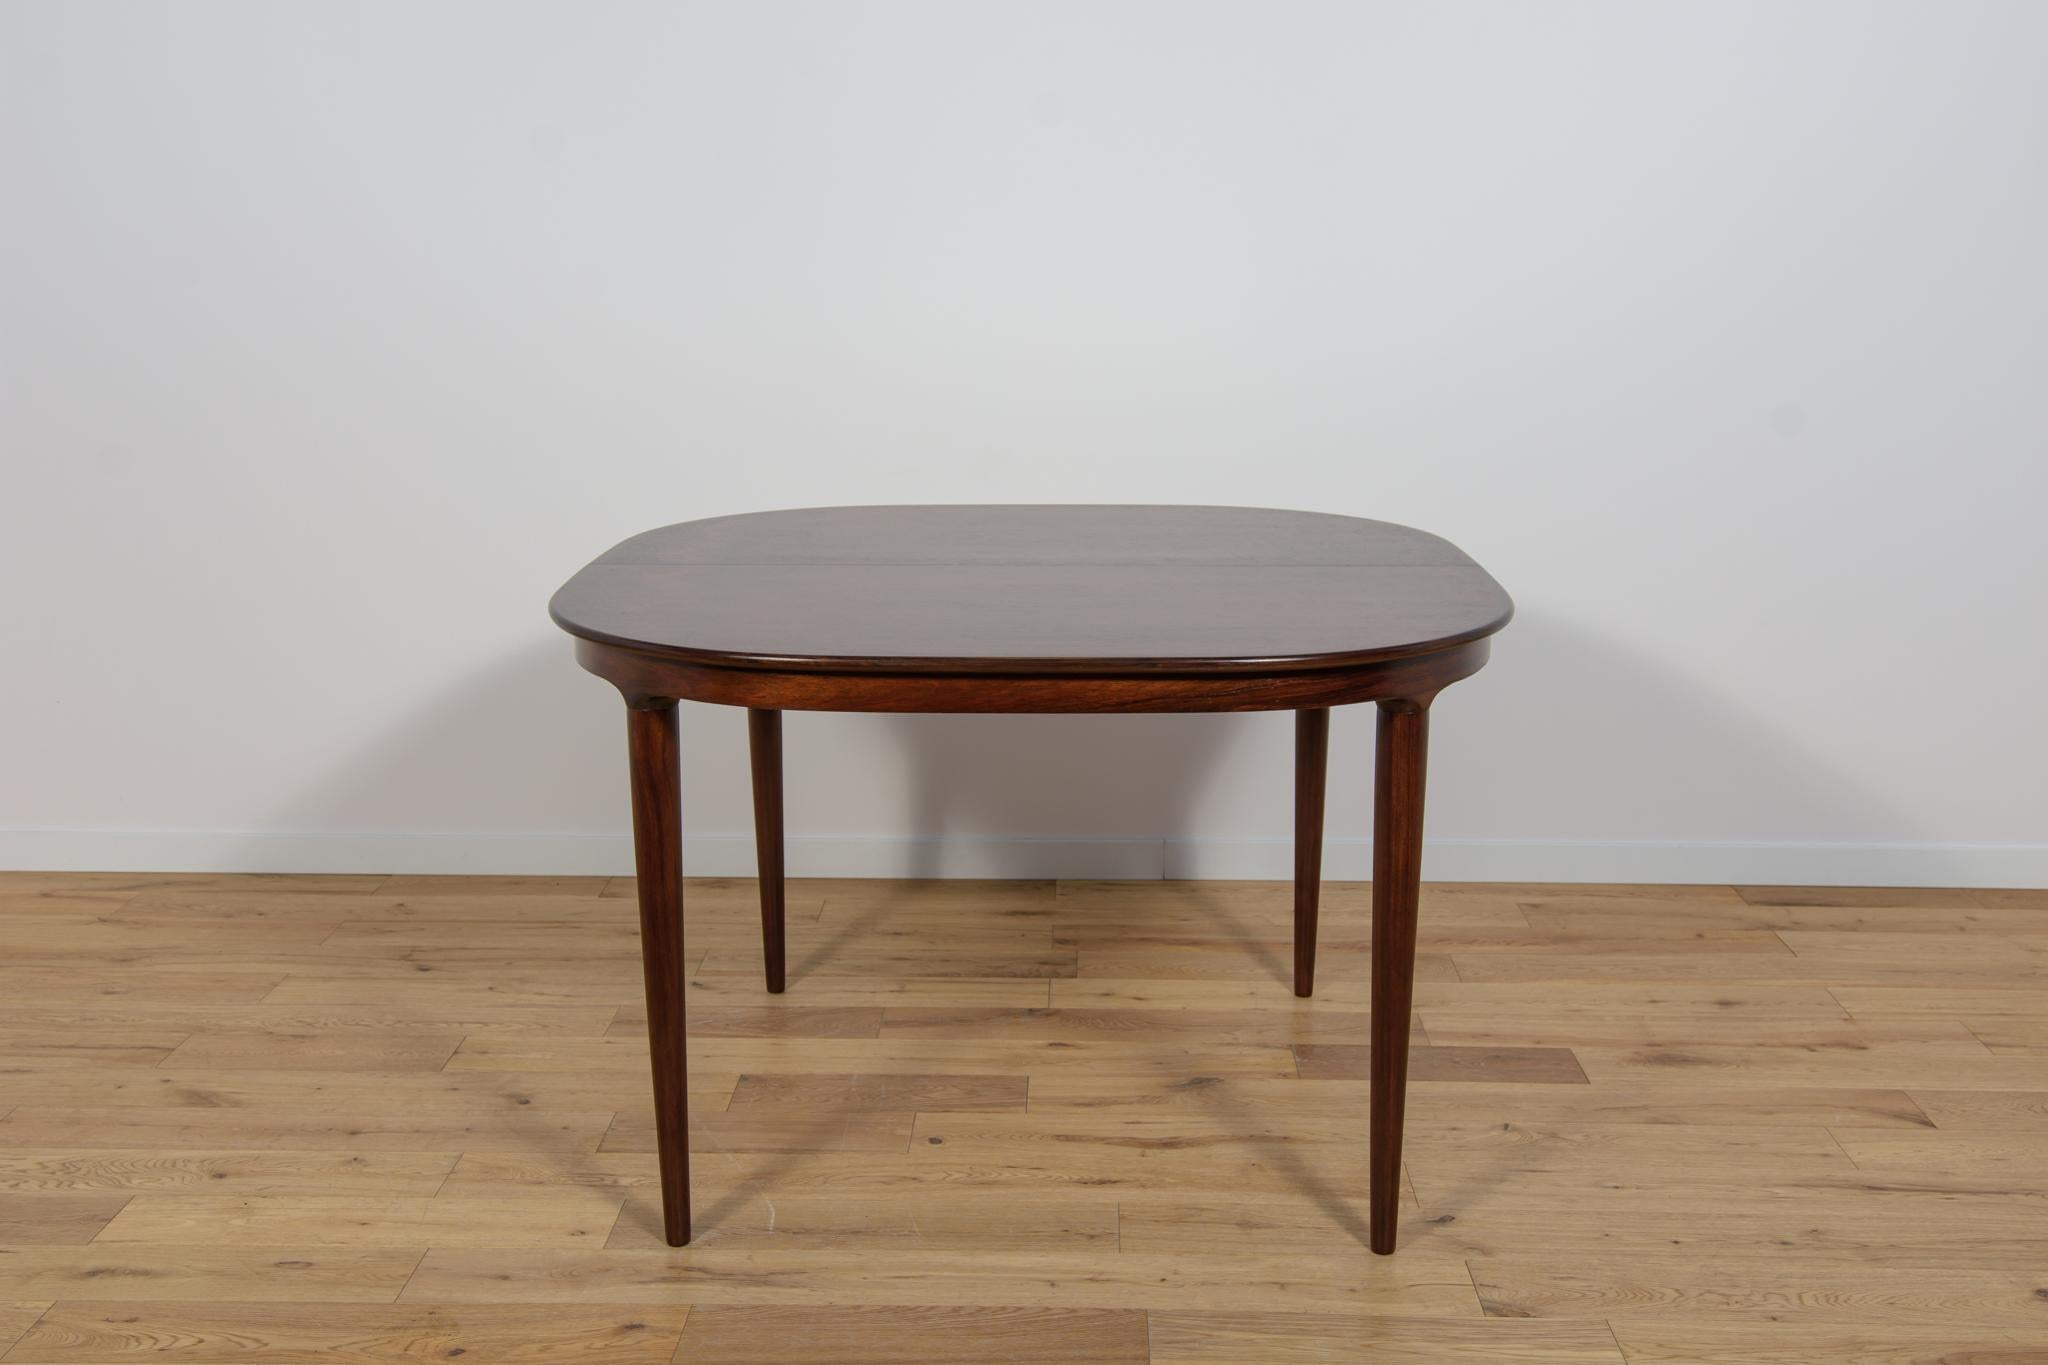 The table produced in the 1960s in Denmark by Skovmand & Andersen. The tabel made of rosewood with a light form and interesting grain. It is characterized by a unique design and high craftsmanship, which is evidenced by reinforced profiled edges and